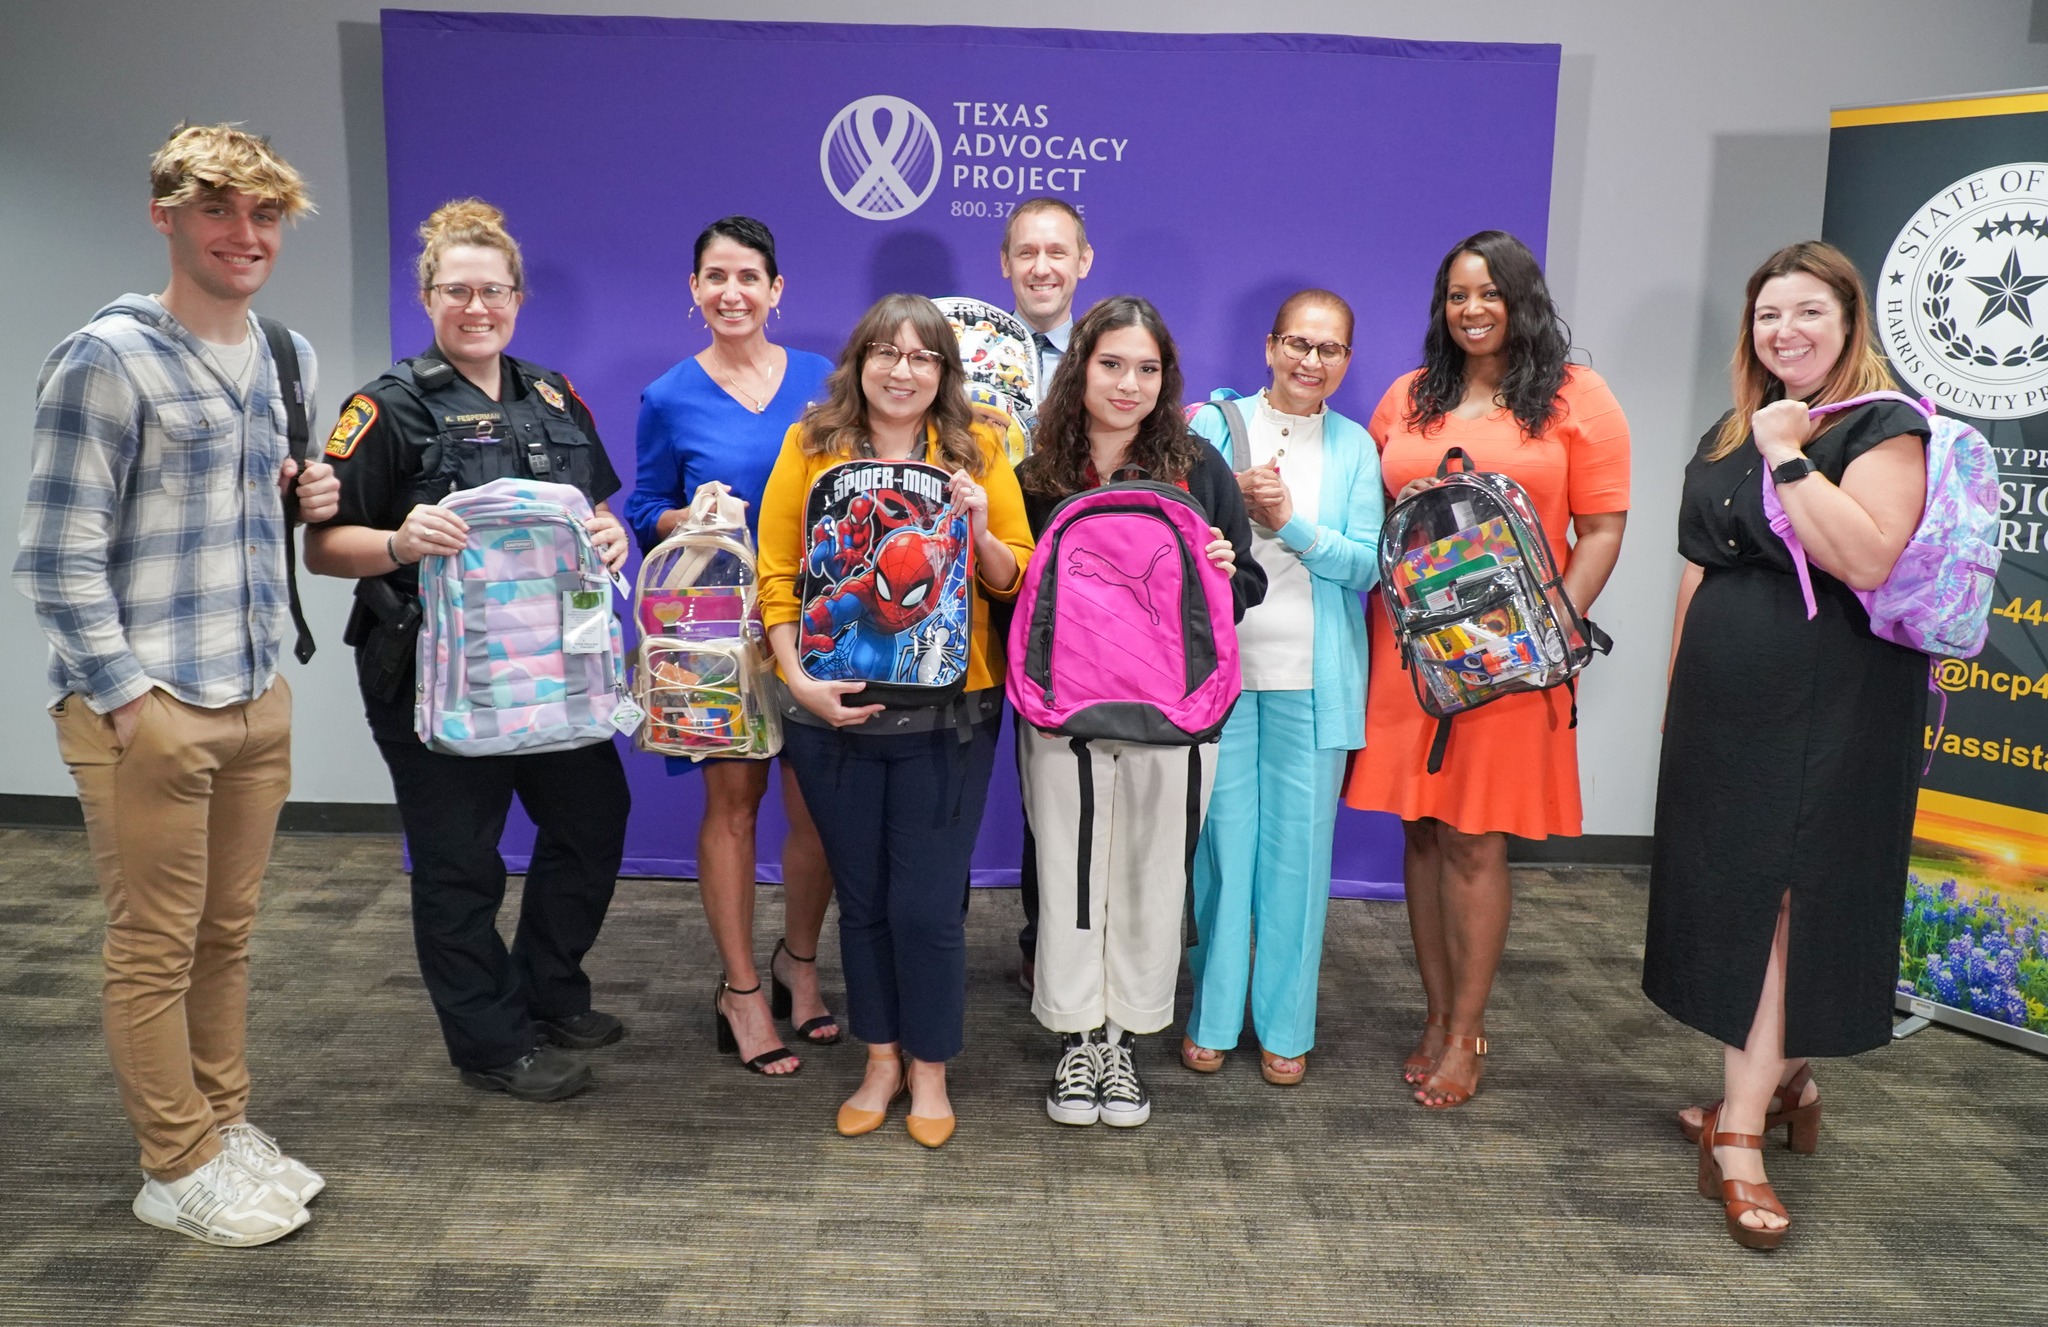 Local Agencies Partner with Texas Advocacy Project for Backpacks for Hope